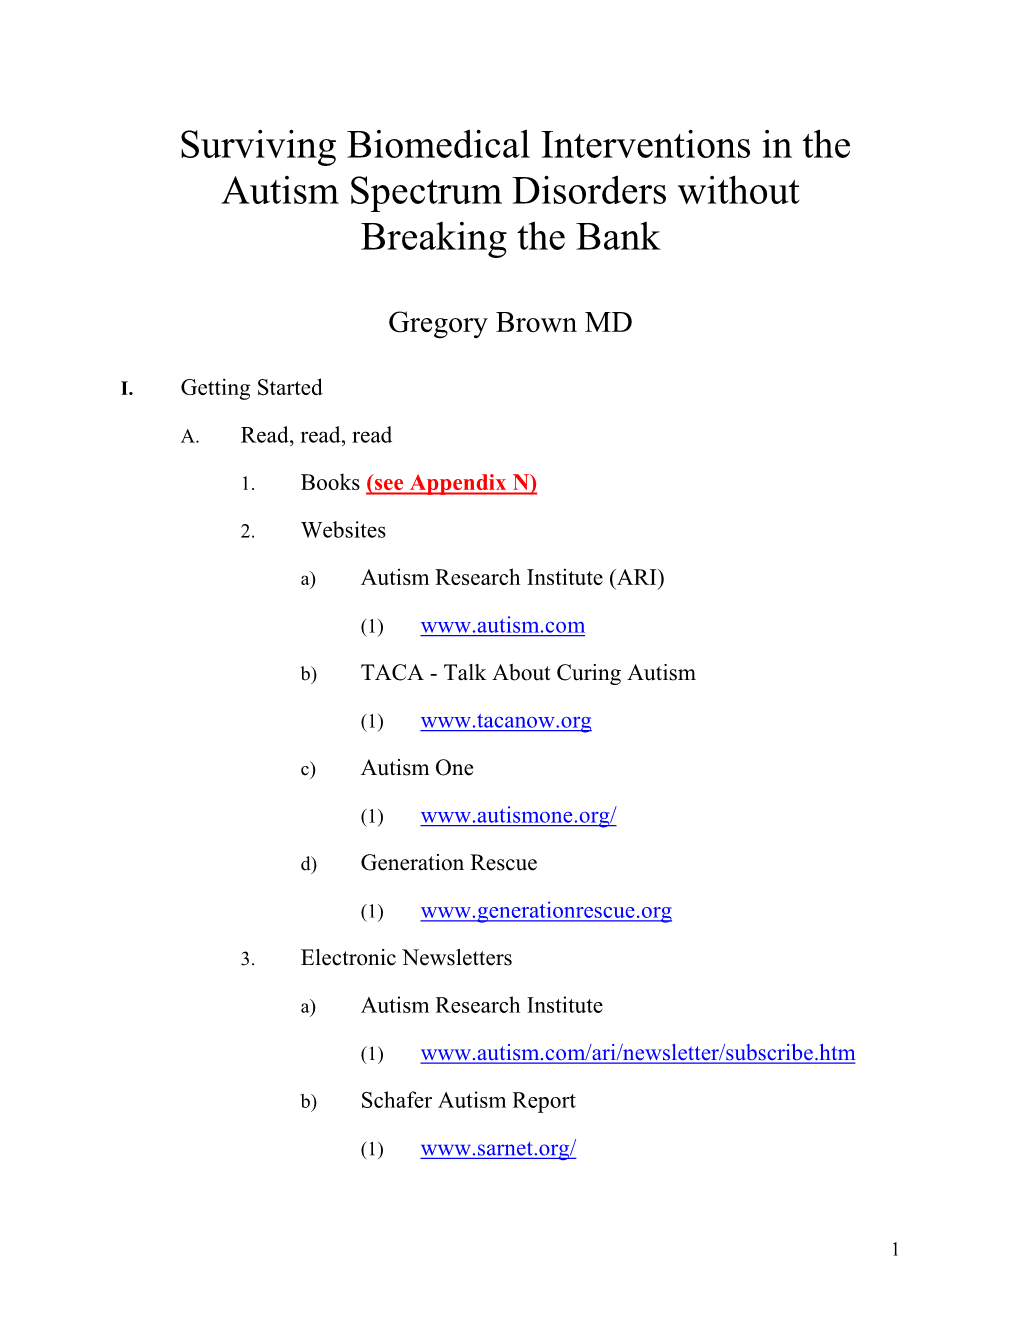 Surviving Biomedical Interventions in the Autism Spectrum Disorders Without Breaking the Bank